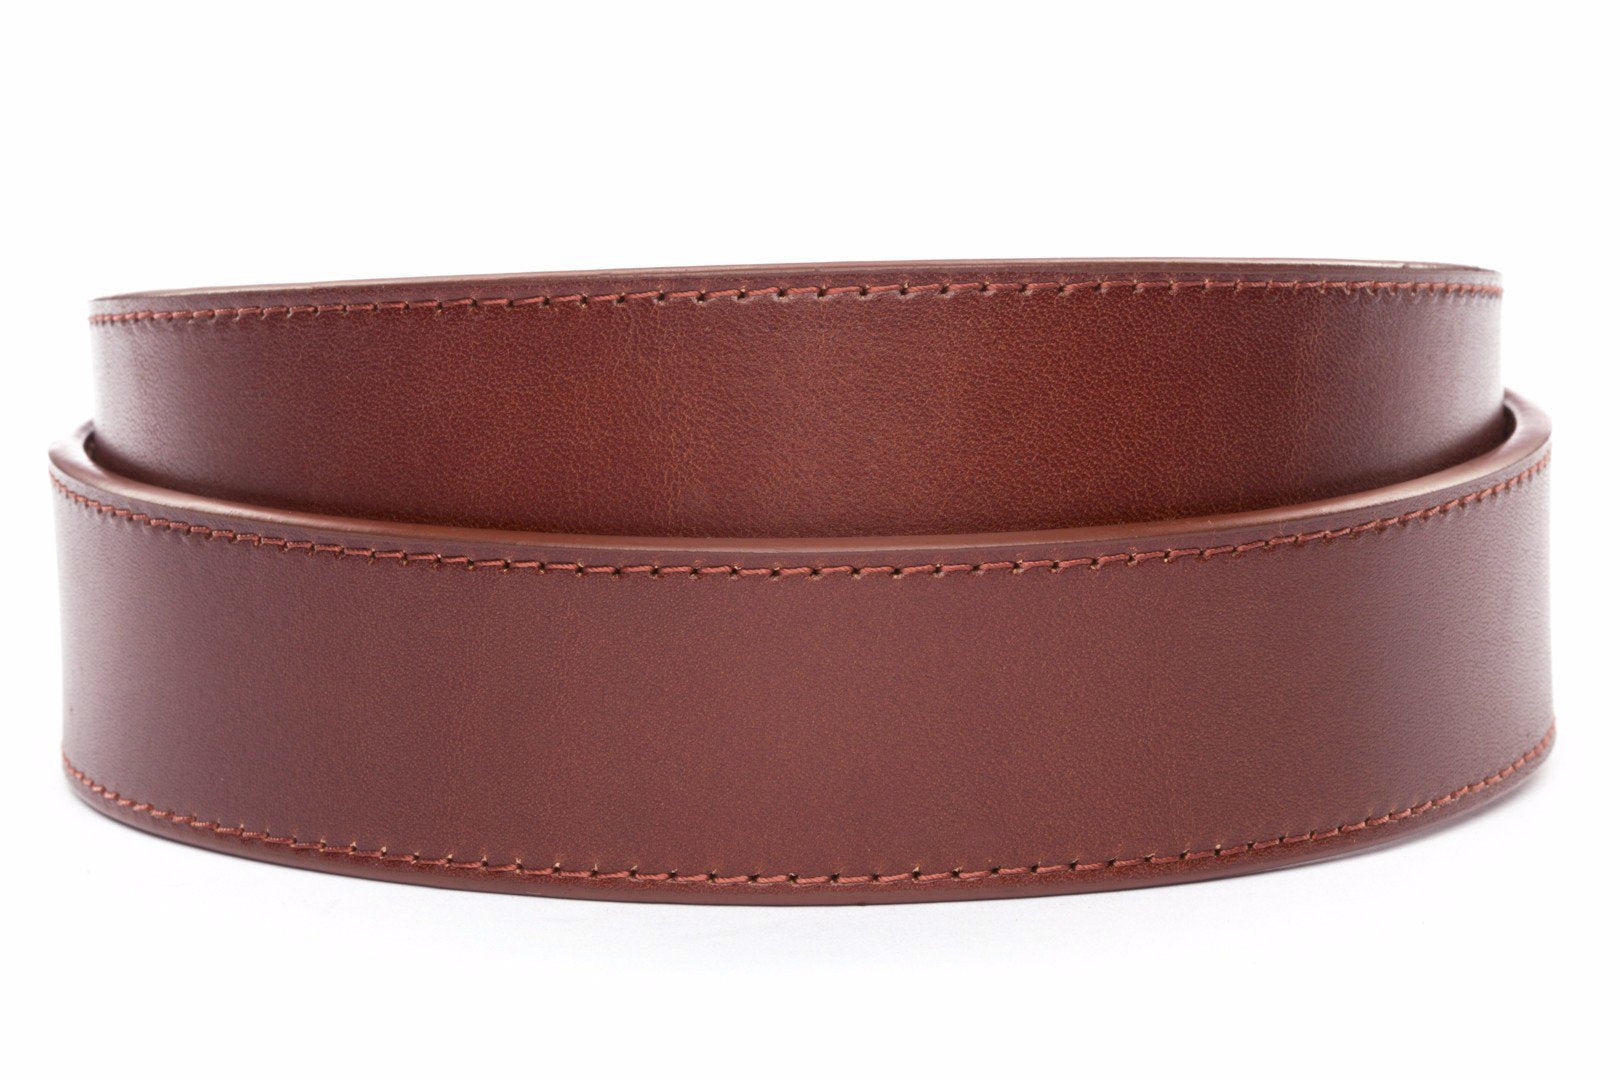 1.5" Picante Vegetable Tanned Leather Strap - Anson Belt & Buckle